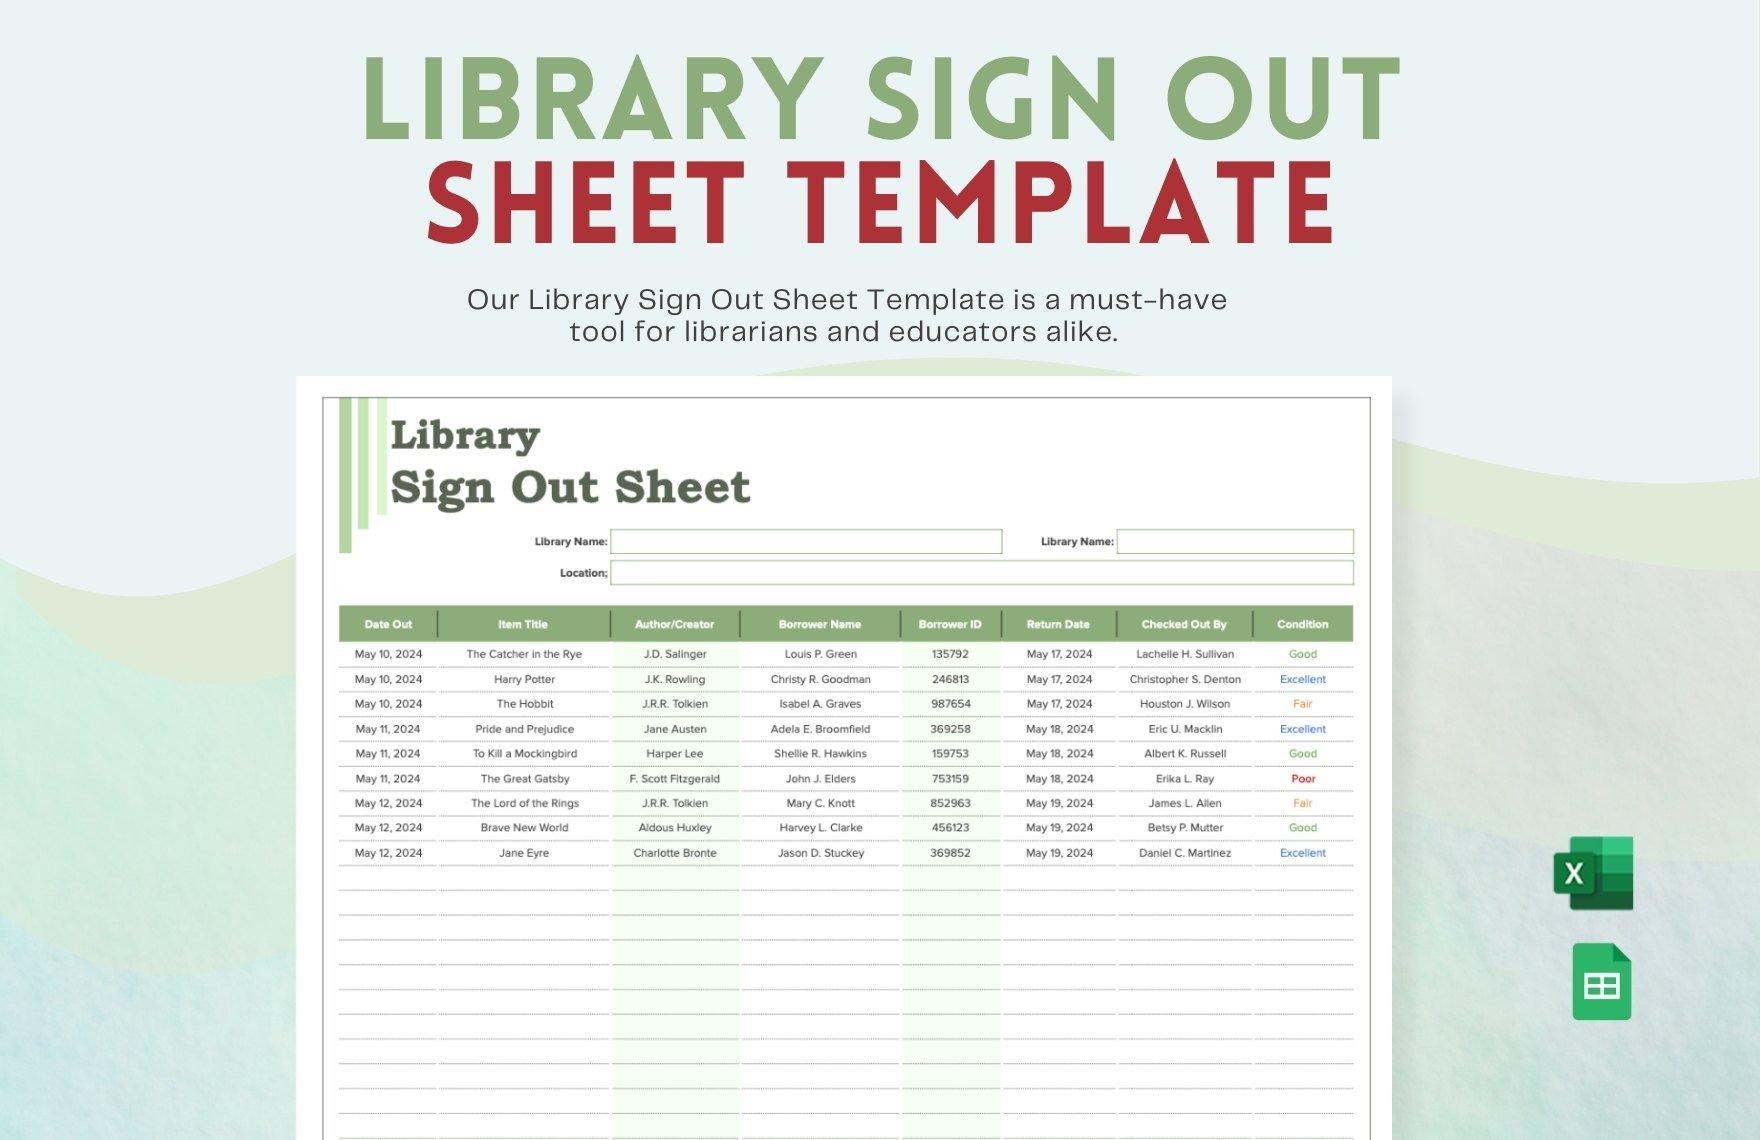 Library Sign Out Sheet Template in Excel, Google Sheets